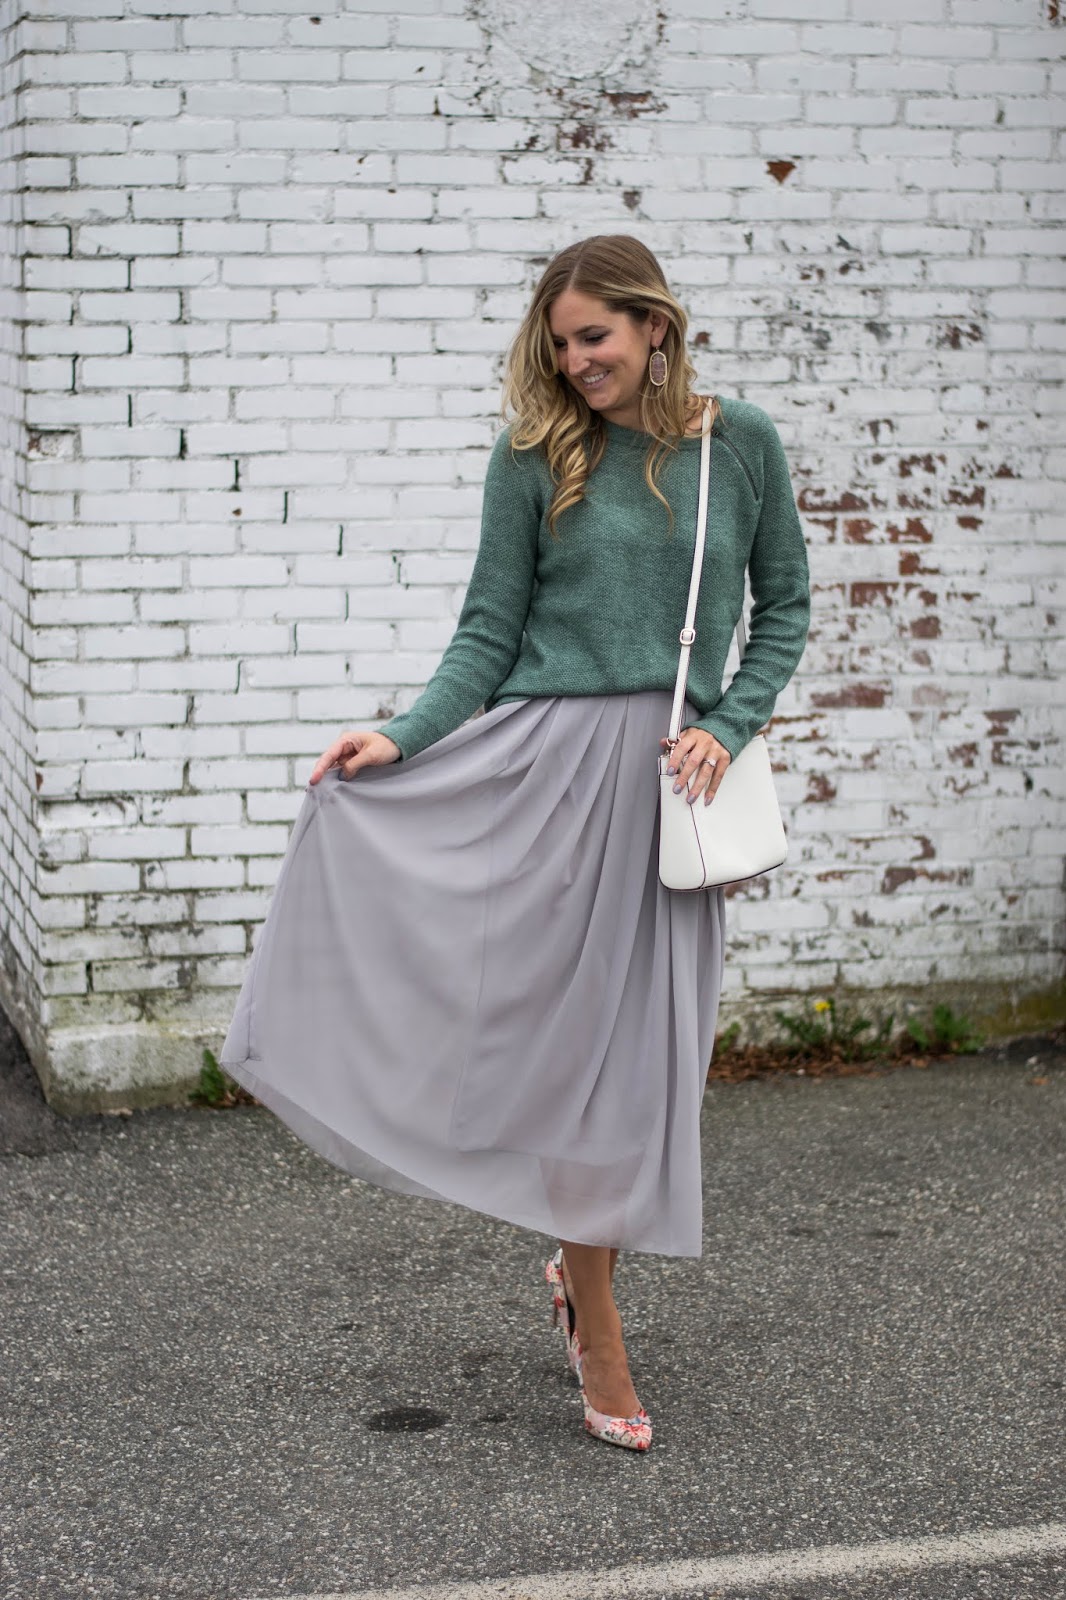 tulle skirt // chunky sweater // similar shoes here & here